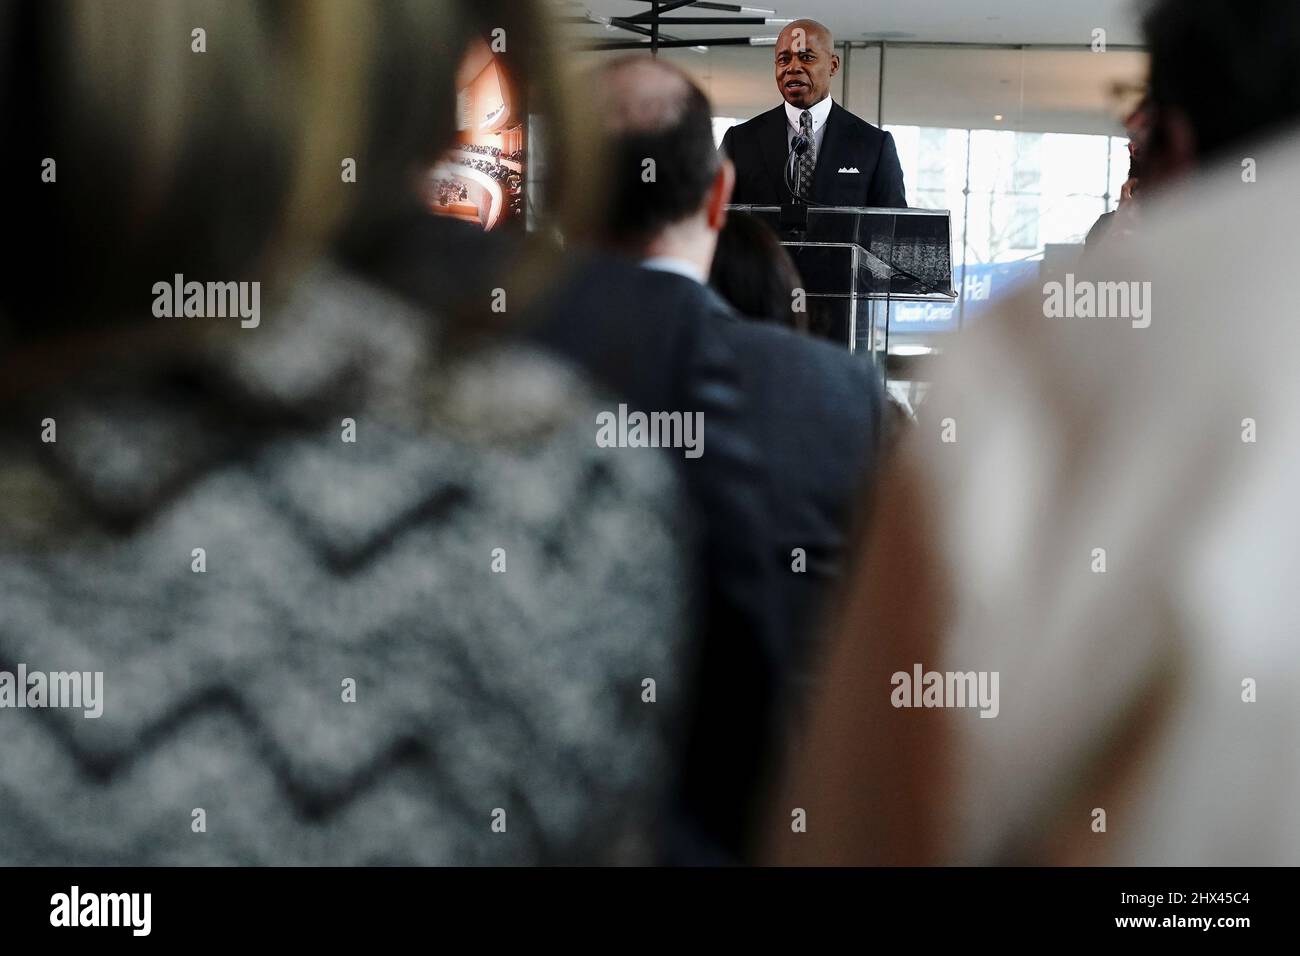 New York City Mayor Eric Adams speaks at a news conference about the newly renovated David Geffen Hall, in the Manhattan borough of New York City, New York, U.S., March 9, 2022.  REUTERS/Carlo Allegri Stock Photo